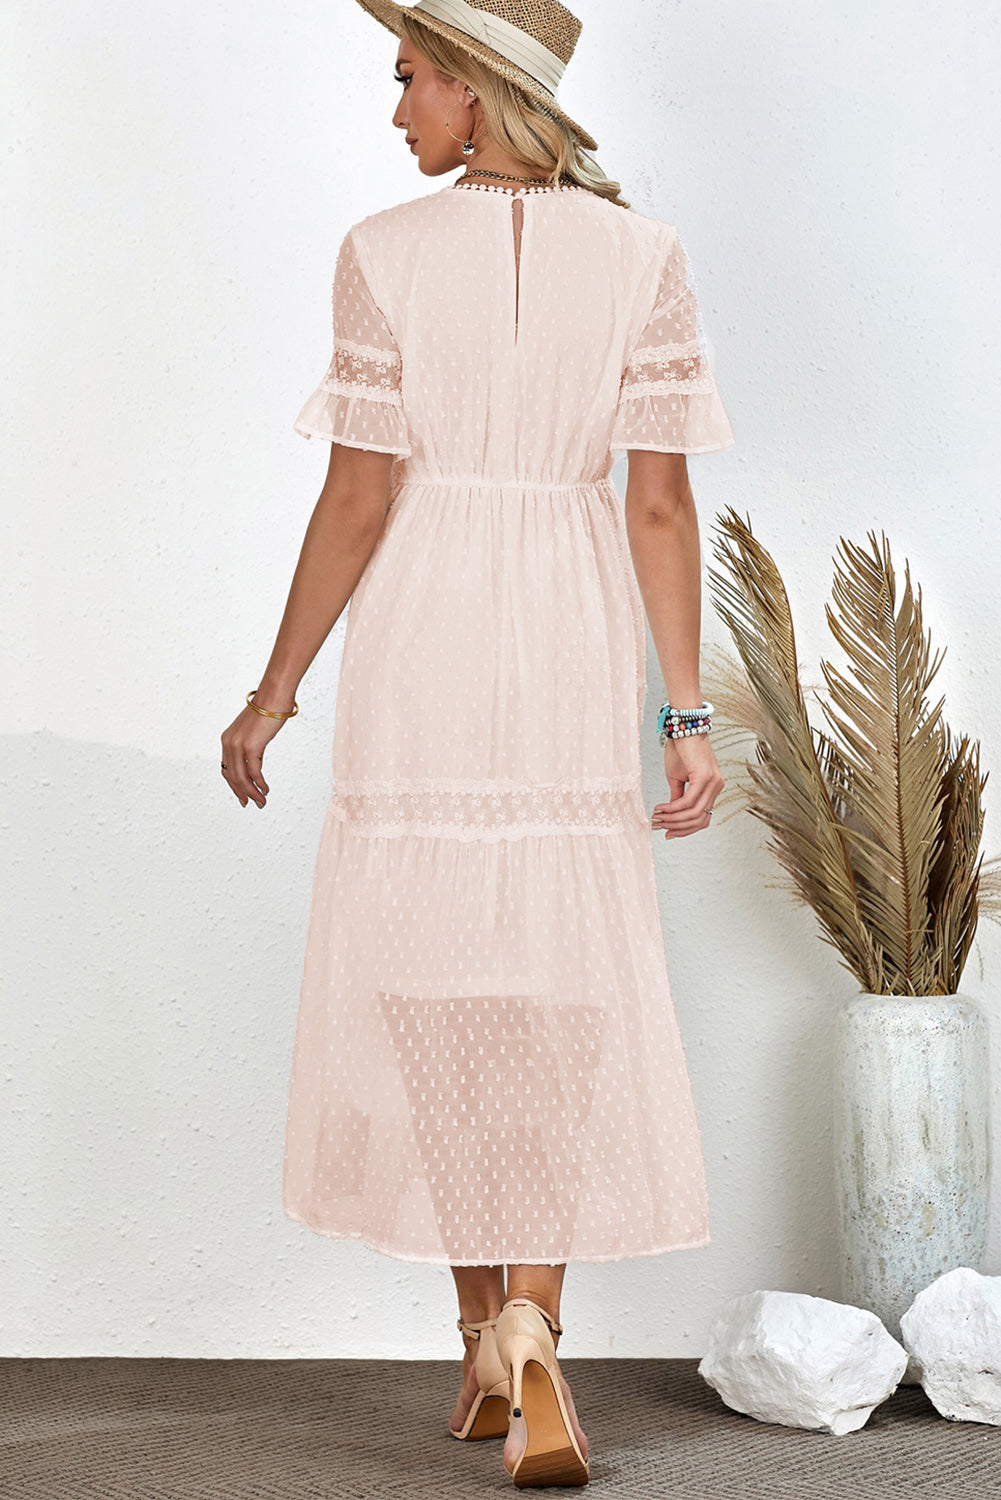 Chic Swiss Dot Midi Dress in white/peach, with a flattering V-neck and airy sleeves, perfect for summer days and elegant evenings.